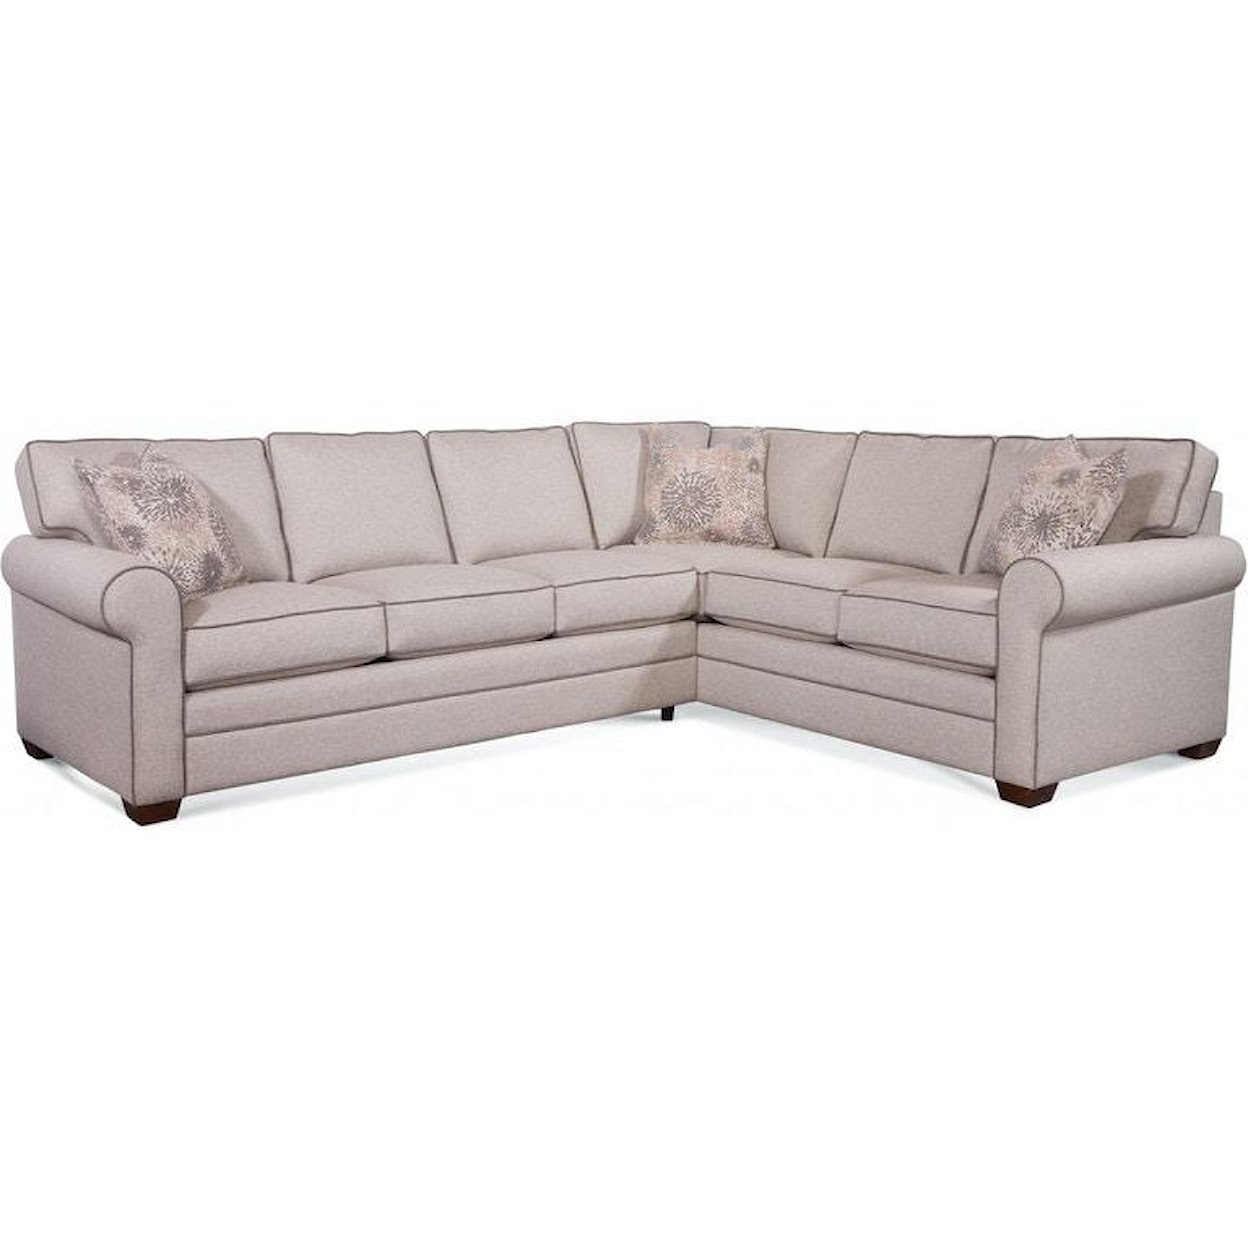 Braxton Culler Bedford Transitional 2-Piece Sectional Sofa